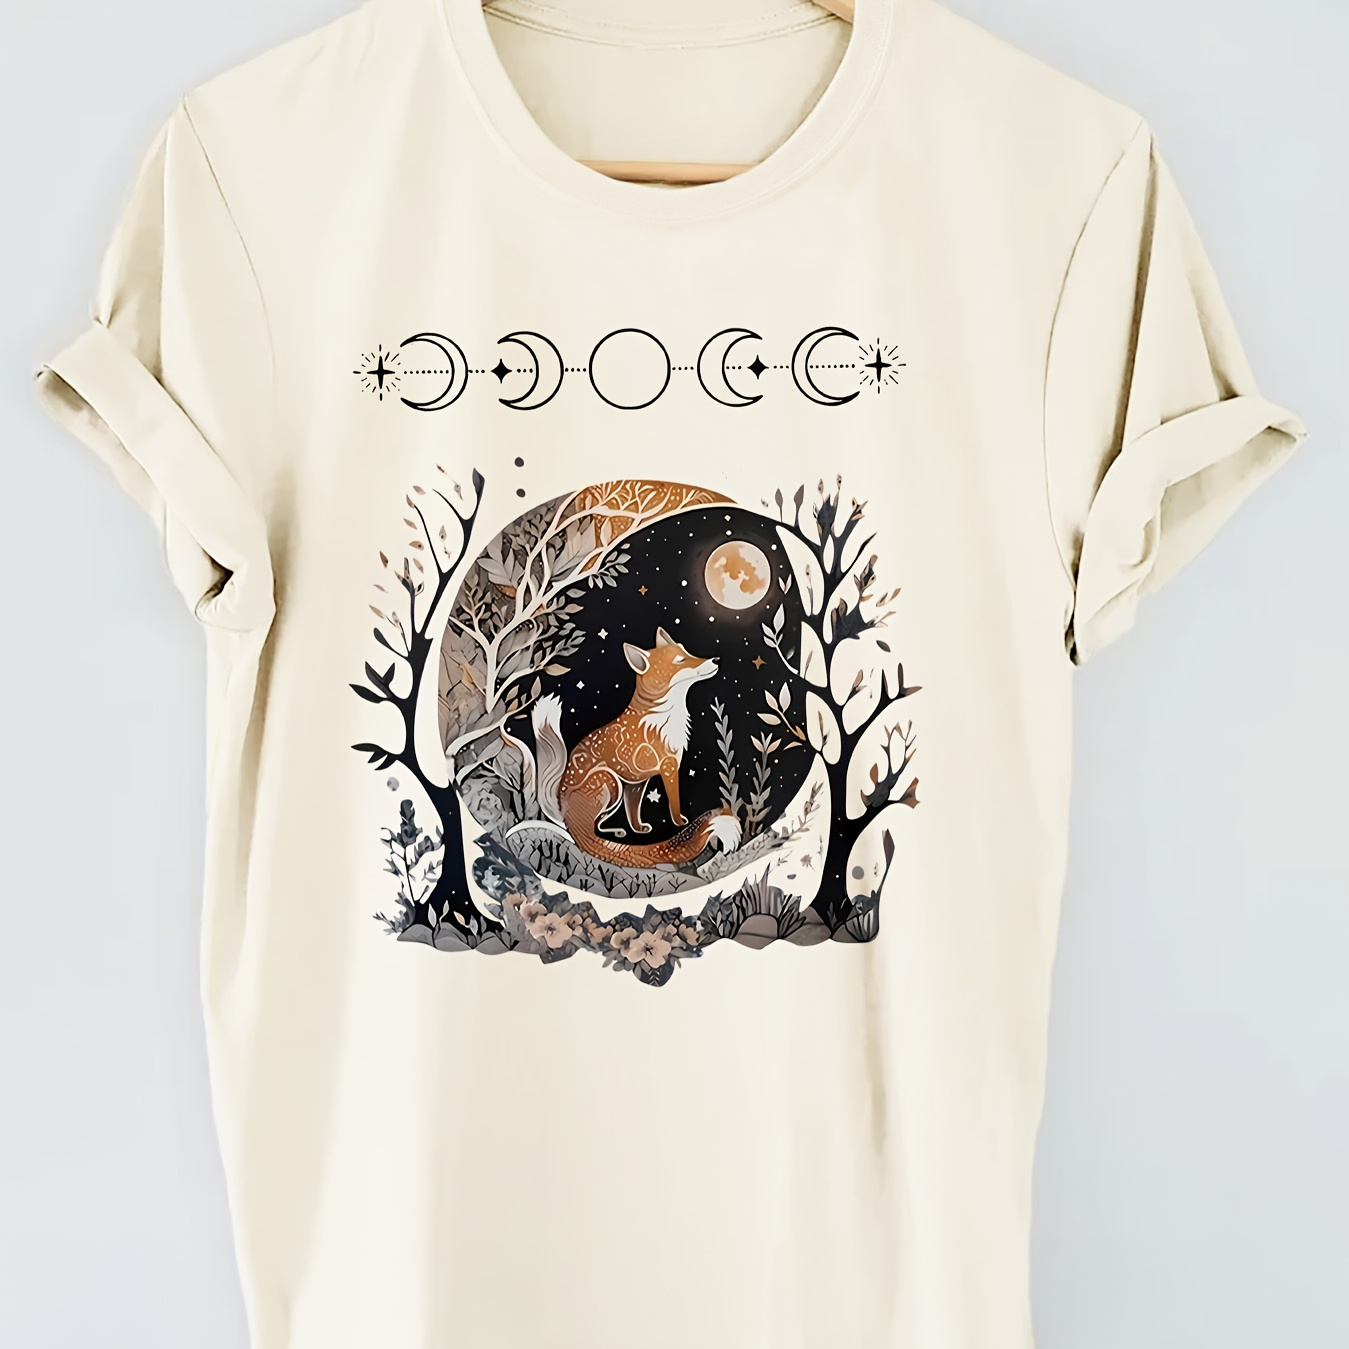 

Fox Print T-shirt, Short Sleeve Crew Neck Casual Top For Summer & Spring, Women's Clothing